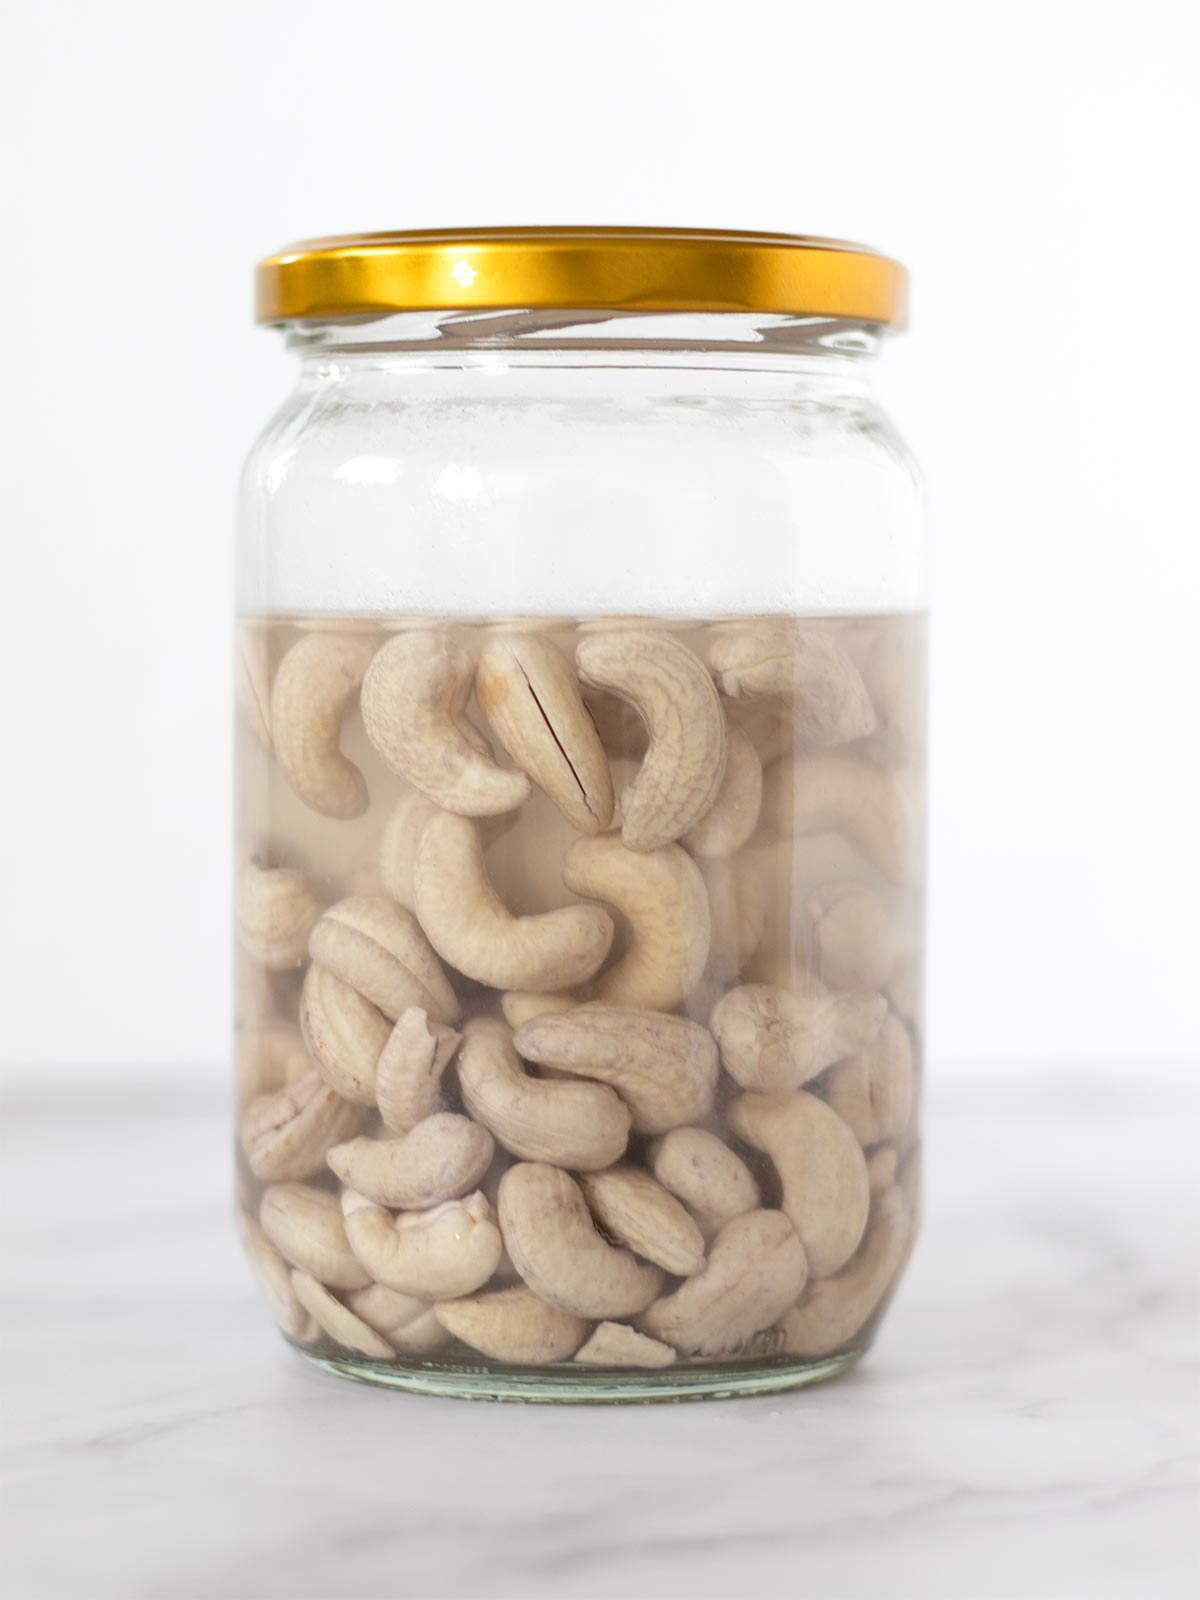 Soaked cashews in a jar